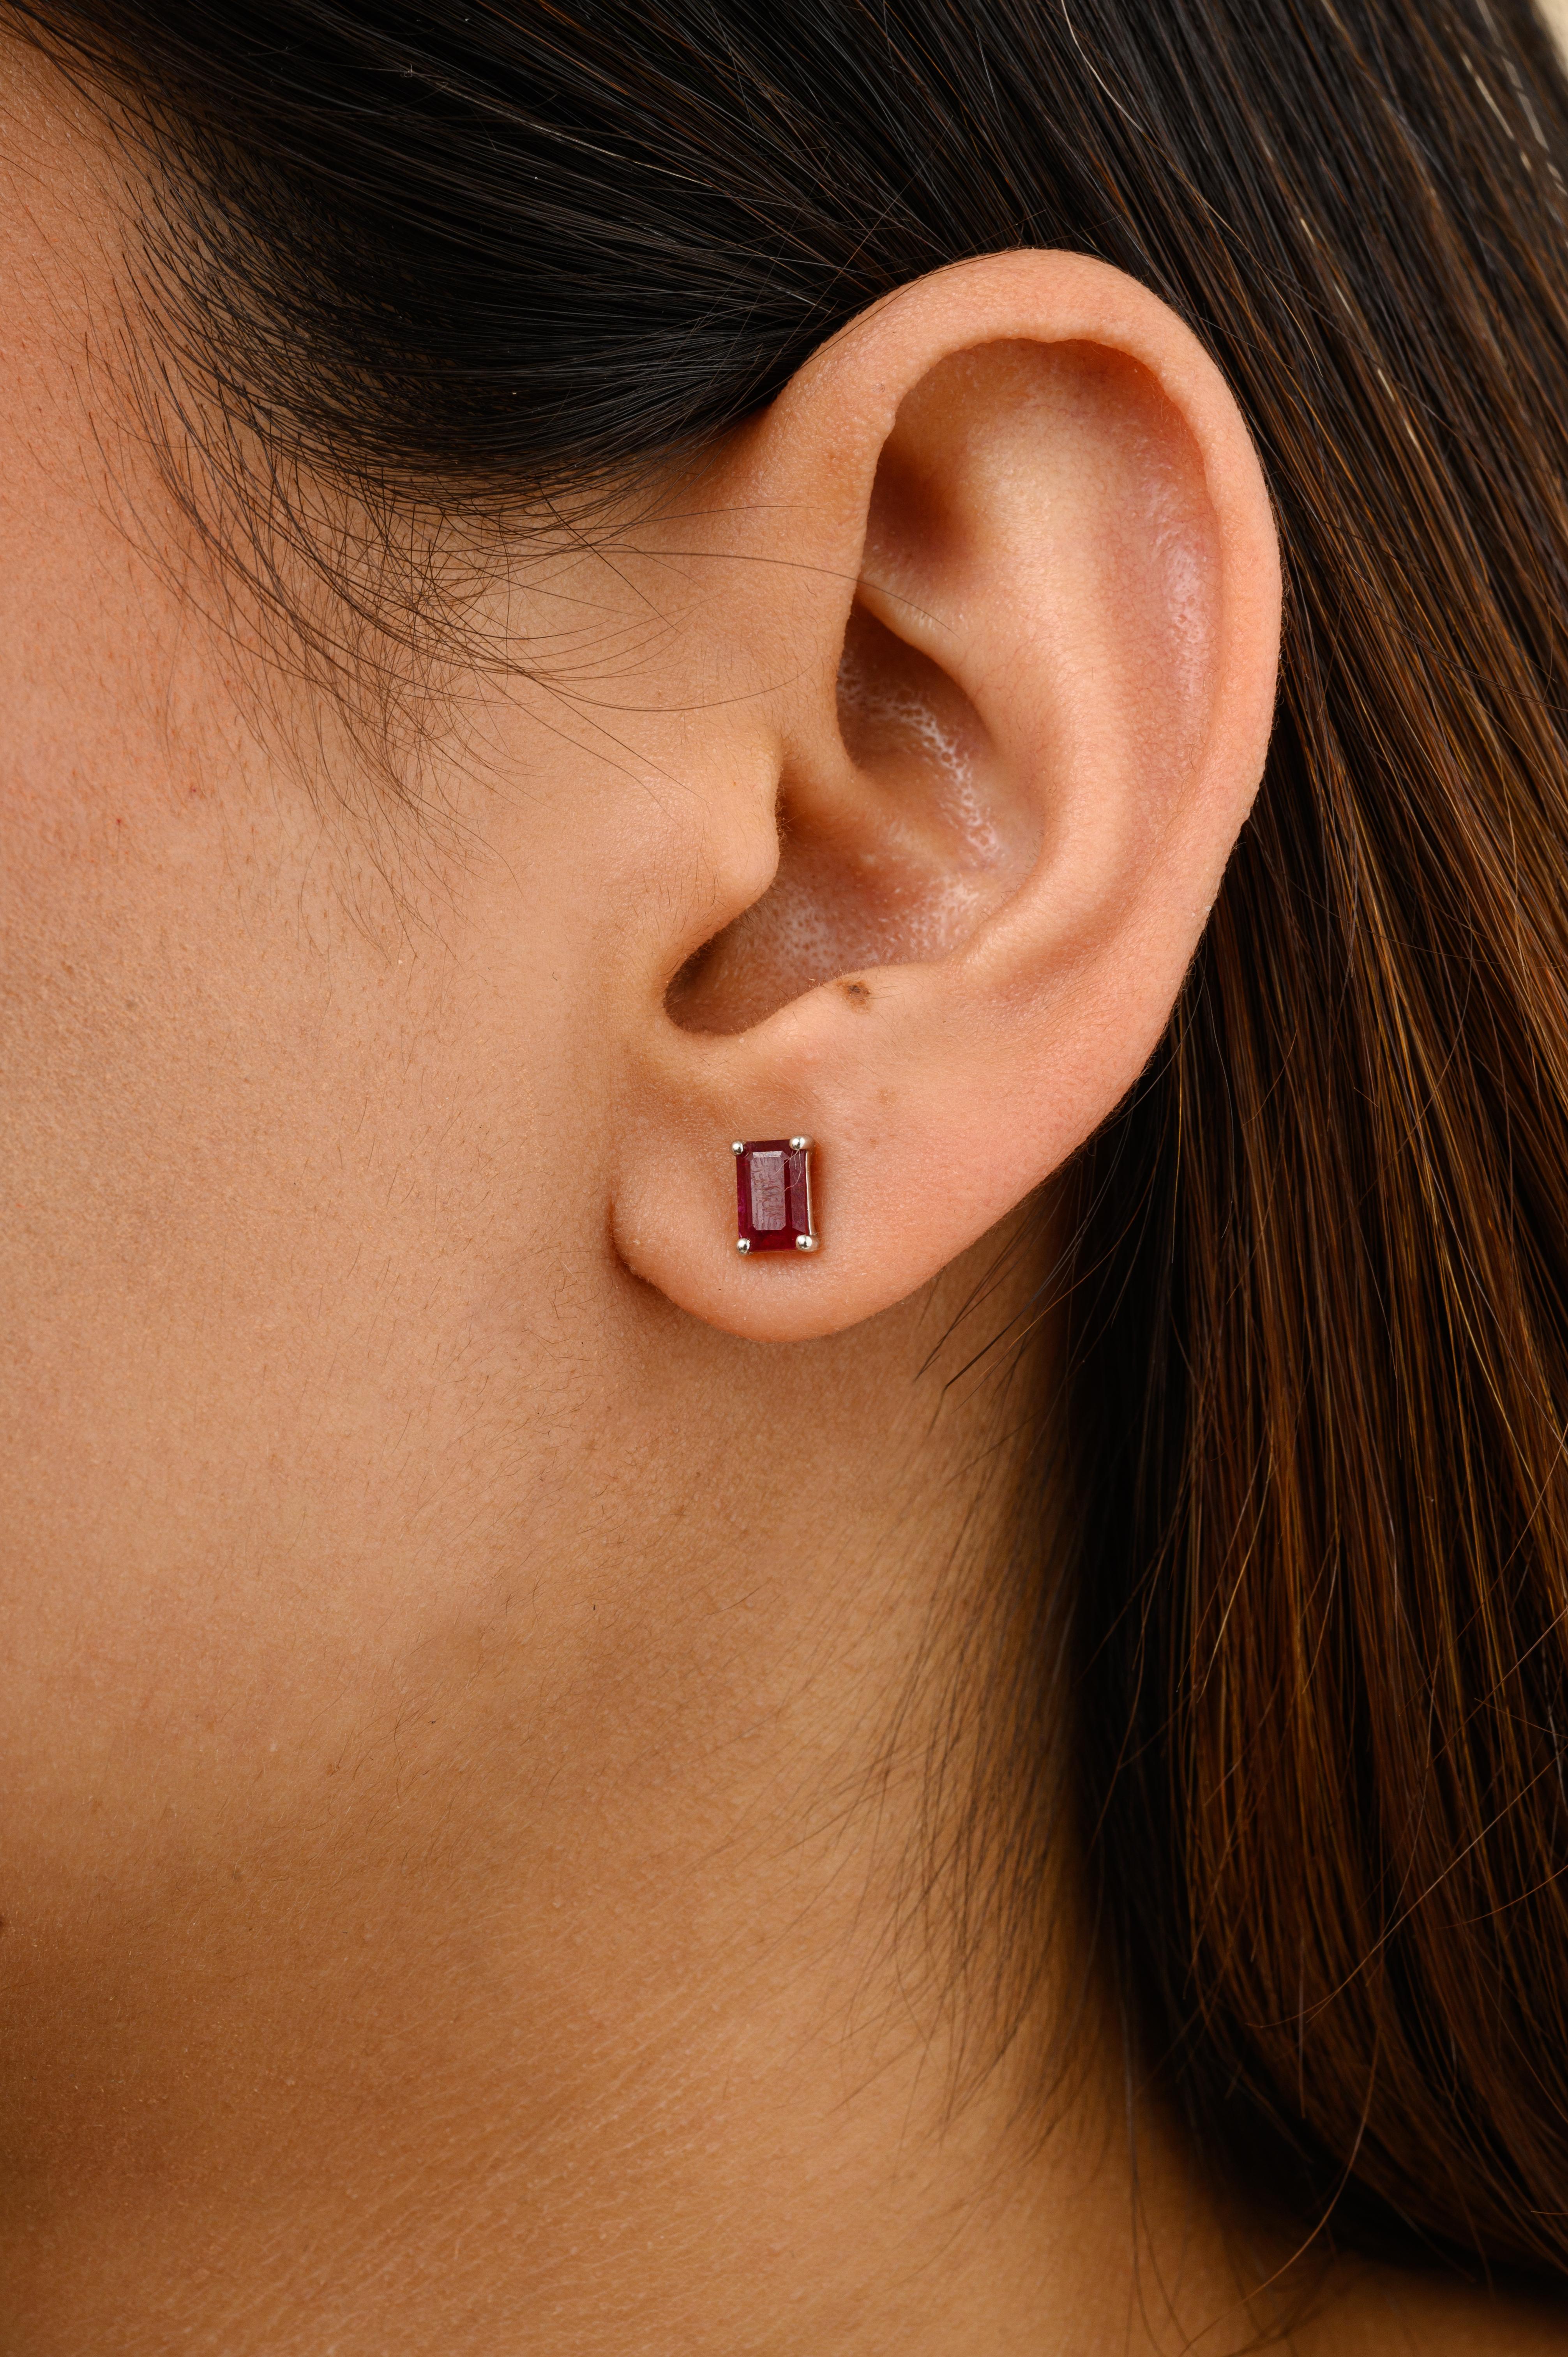 Dainty Natural Ruby Gemstone Stud Earrings for Mom in 14K Gold to make a statement with your look. You shall need stud earrings to make a statement with your look. These earrings create a sparkling, luxurious look featuring baguette cut ruby.
Ruby